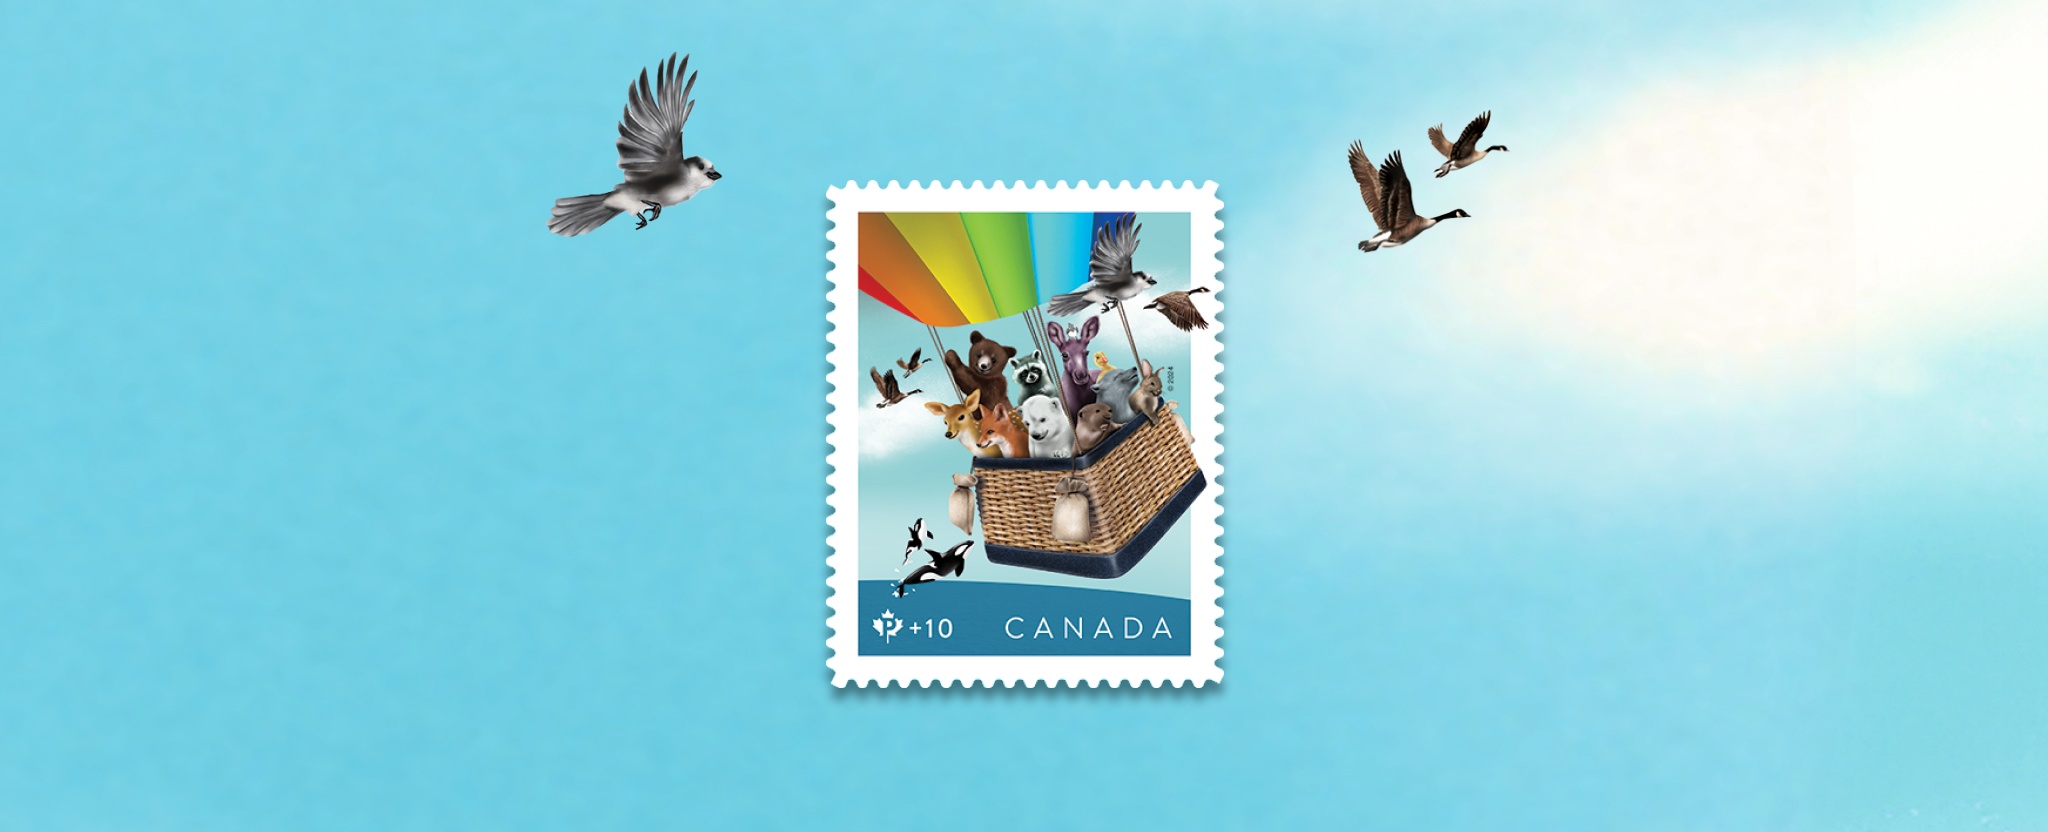 The 2024 Community Foundation stamp features an illustration of animals floating in a hot air balloon.